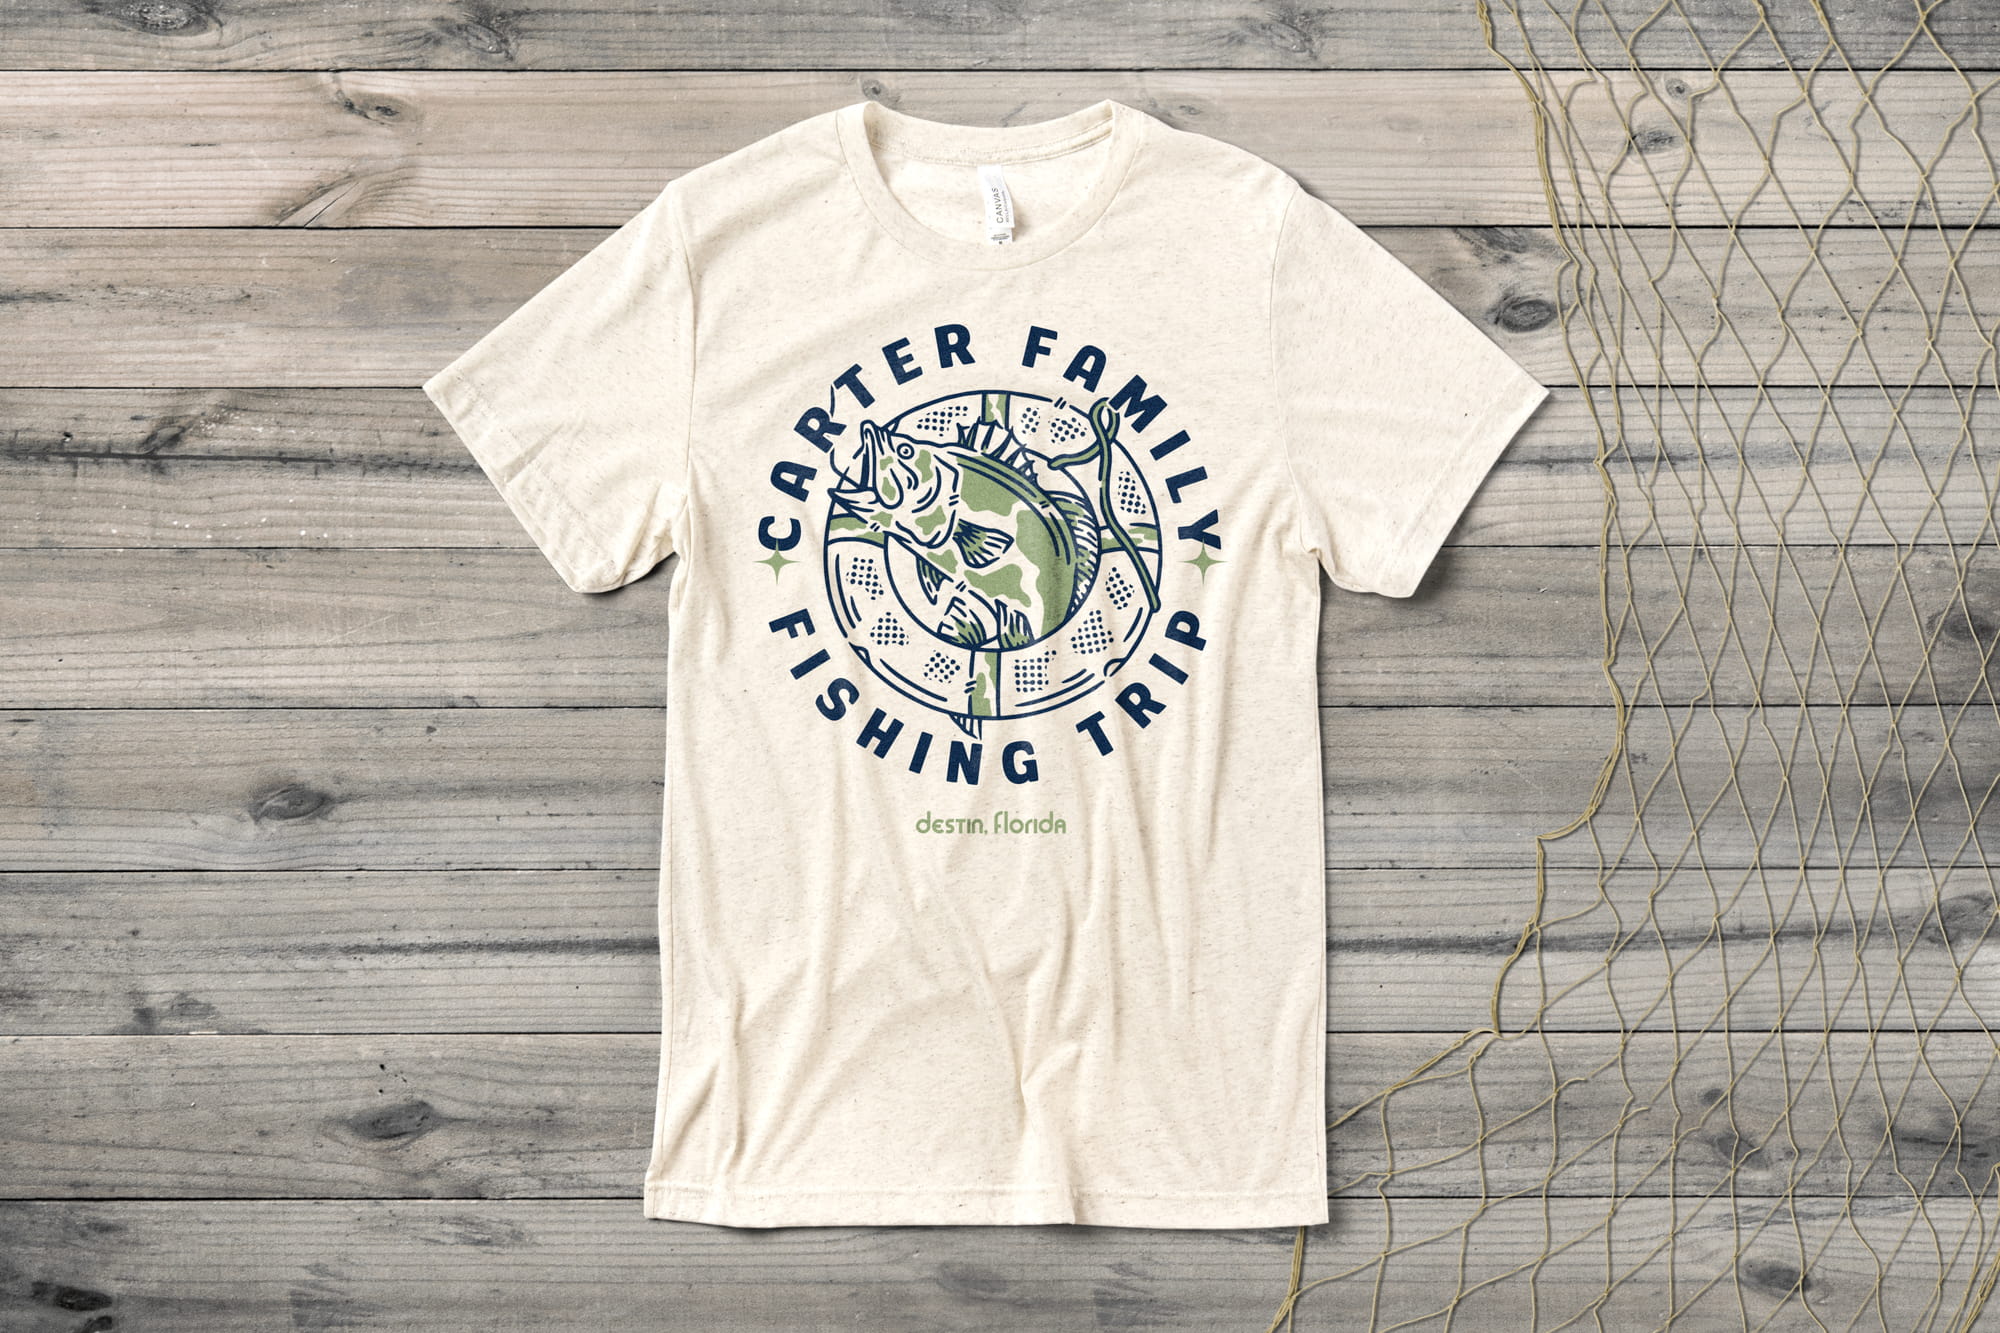 Custom t-shirt with a fishing themed template on the shirt. It says "Carter Family Fishing Trip. Destin, Florida"